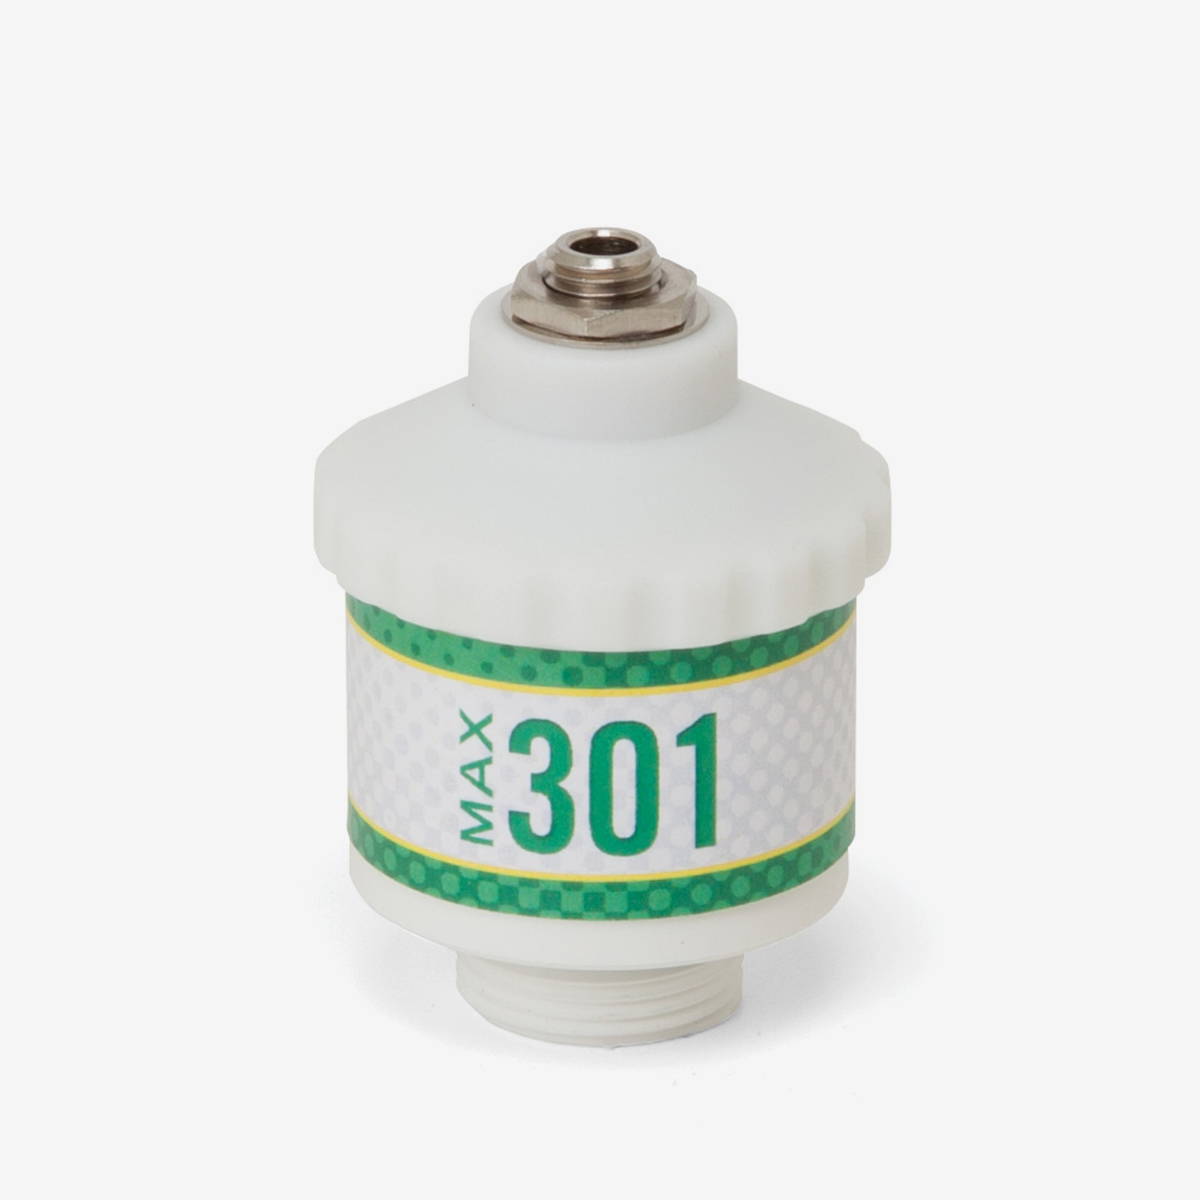 White and green cylindrical Max-301 scuba sensor on white background